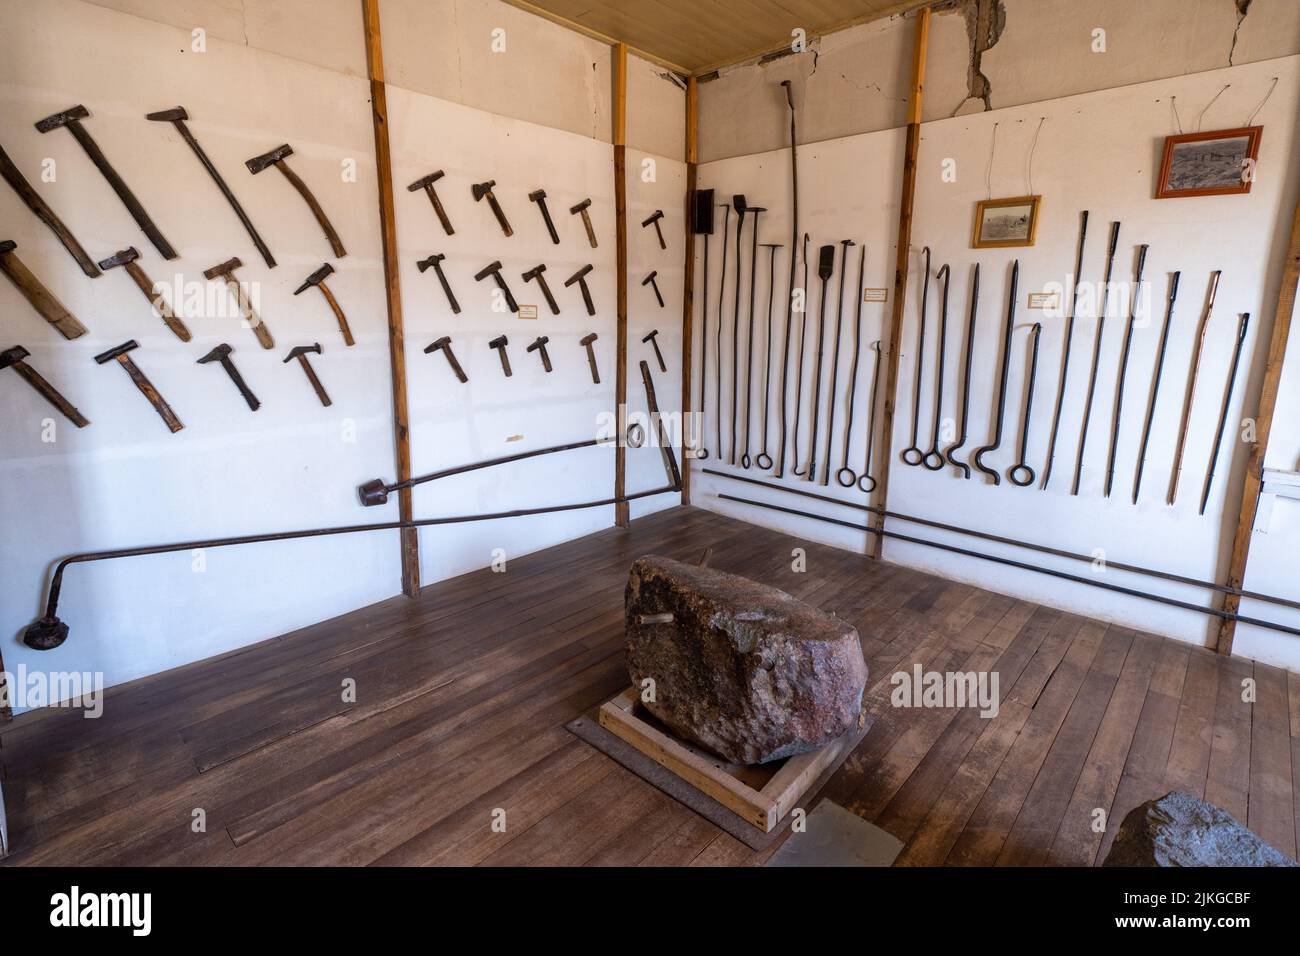 Museum display of tools used in the processing of saltpeter at Humberstone, Chile. Stock Photo